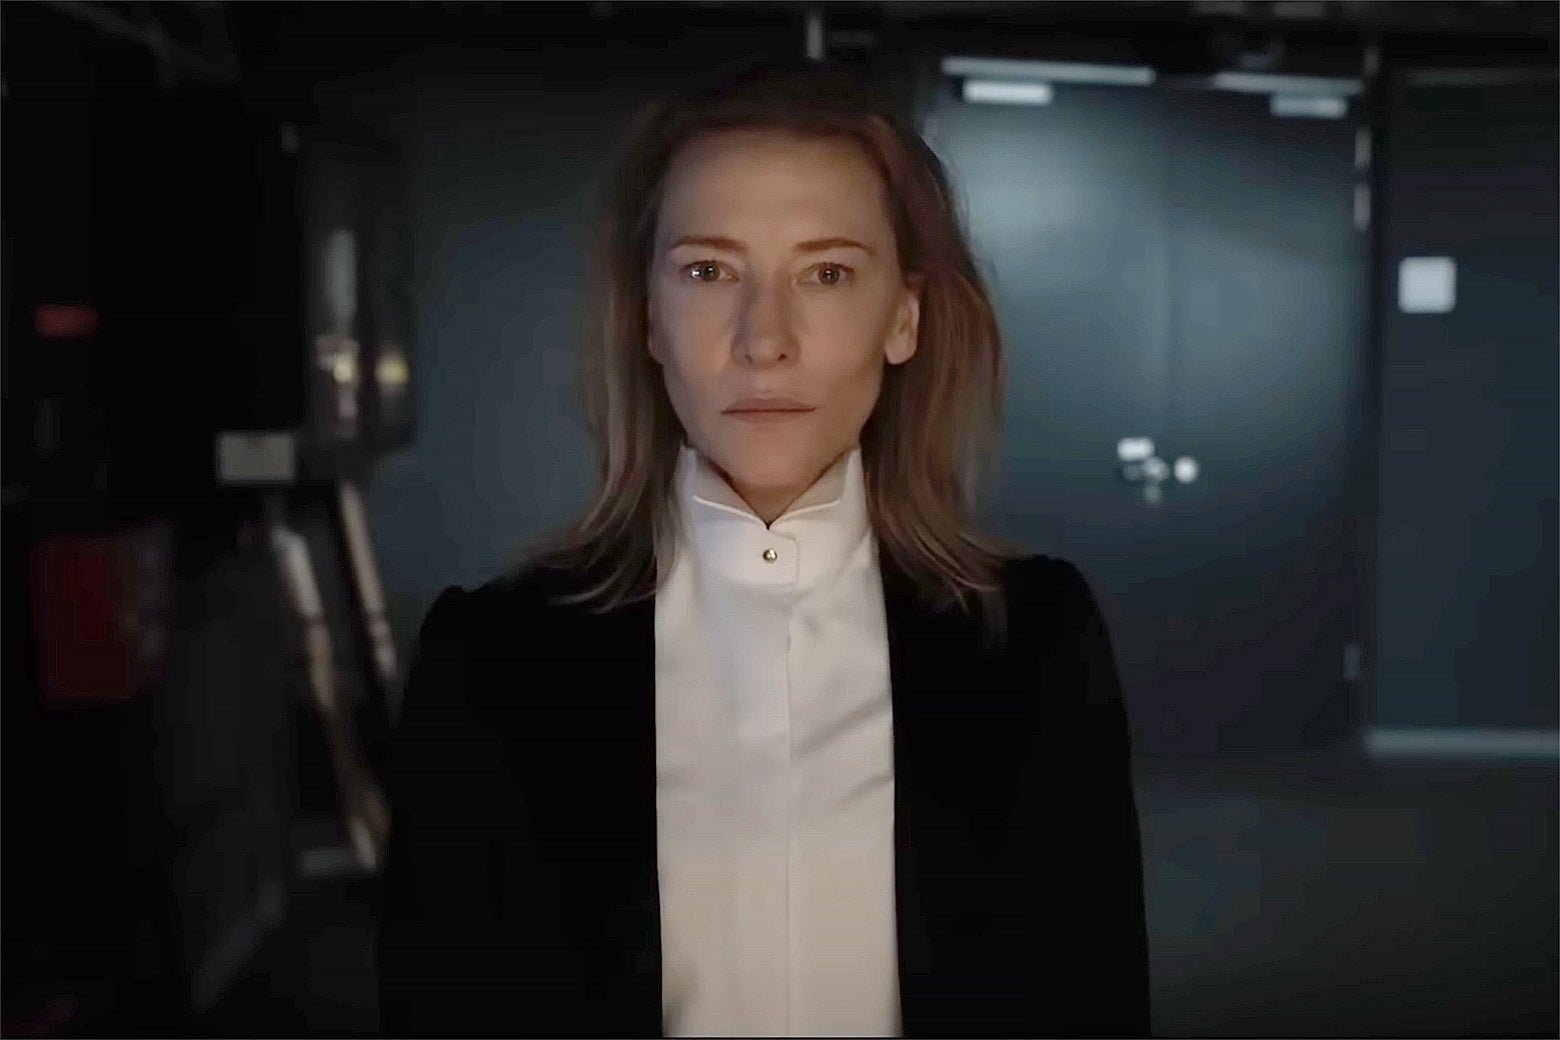 Tar movie ending: Everyone's reading the Cate Blanchett movie all wrong.